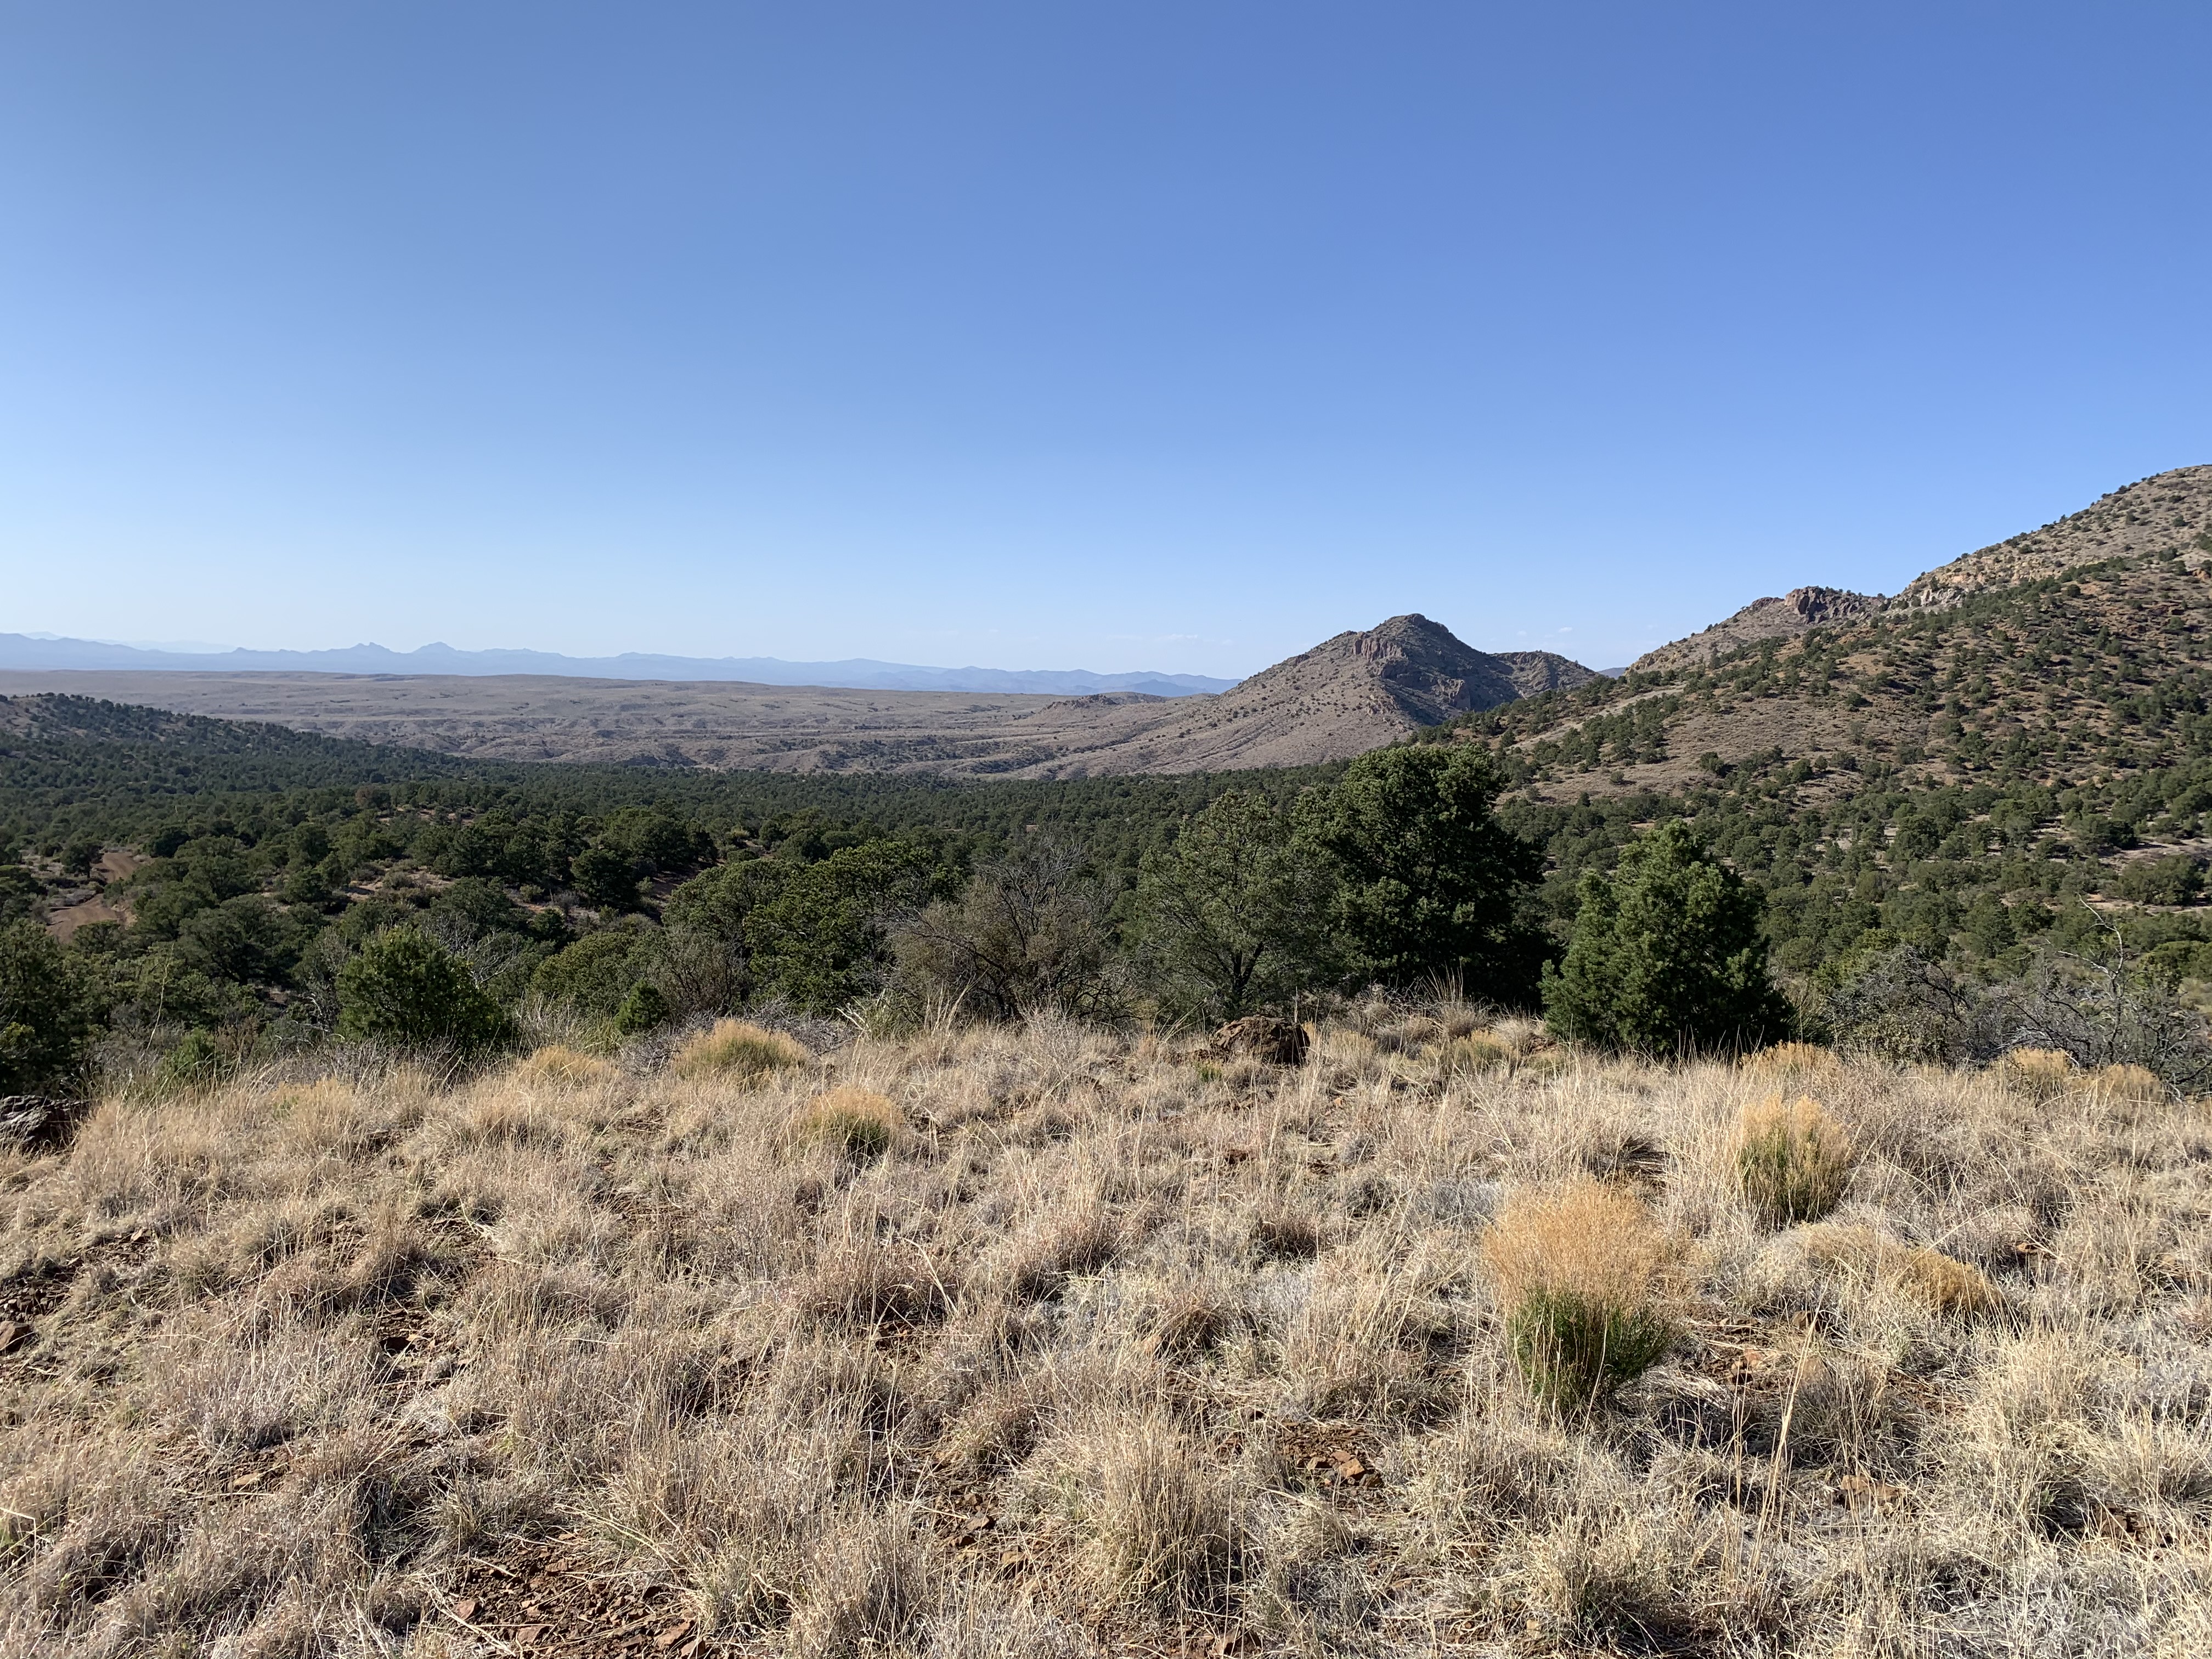 GRIP submits scoping comments on Malone Bronco Mineral Exploration Project